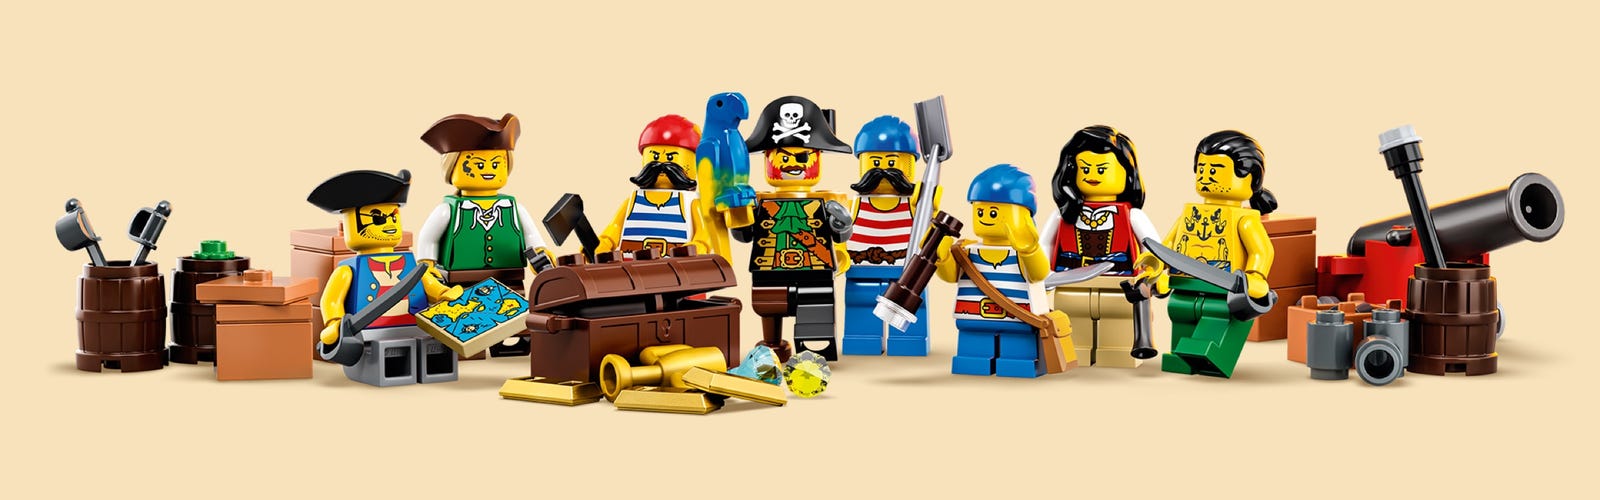 Pirates of Barracuda Bay 21322 | | Buy online at the Official LEGO® Shop US